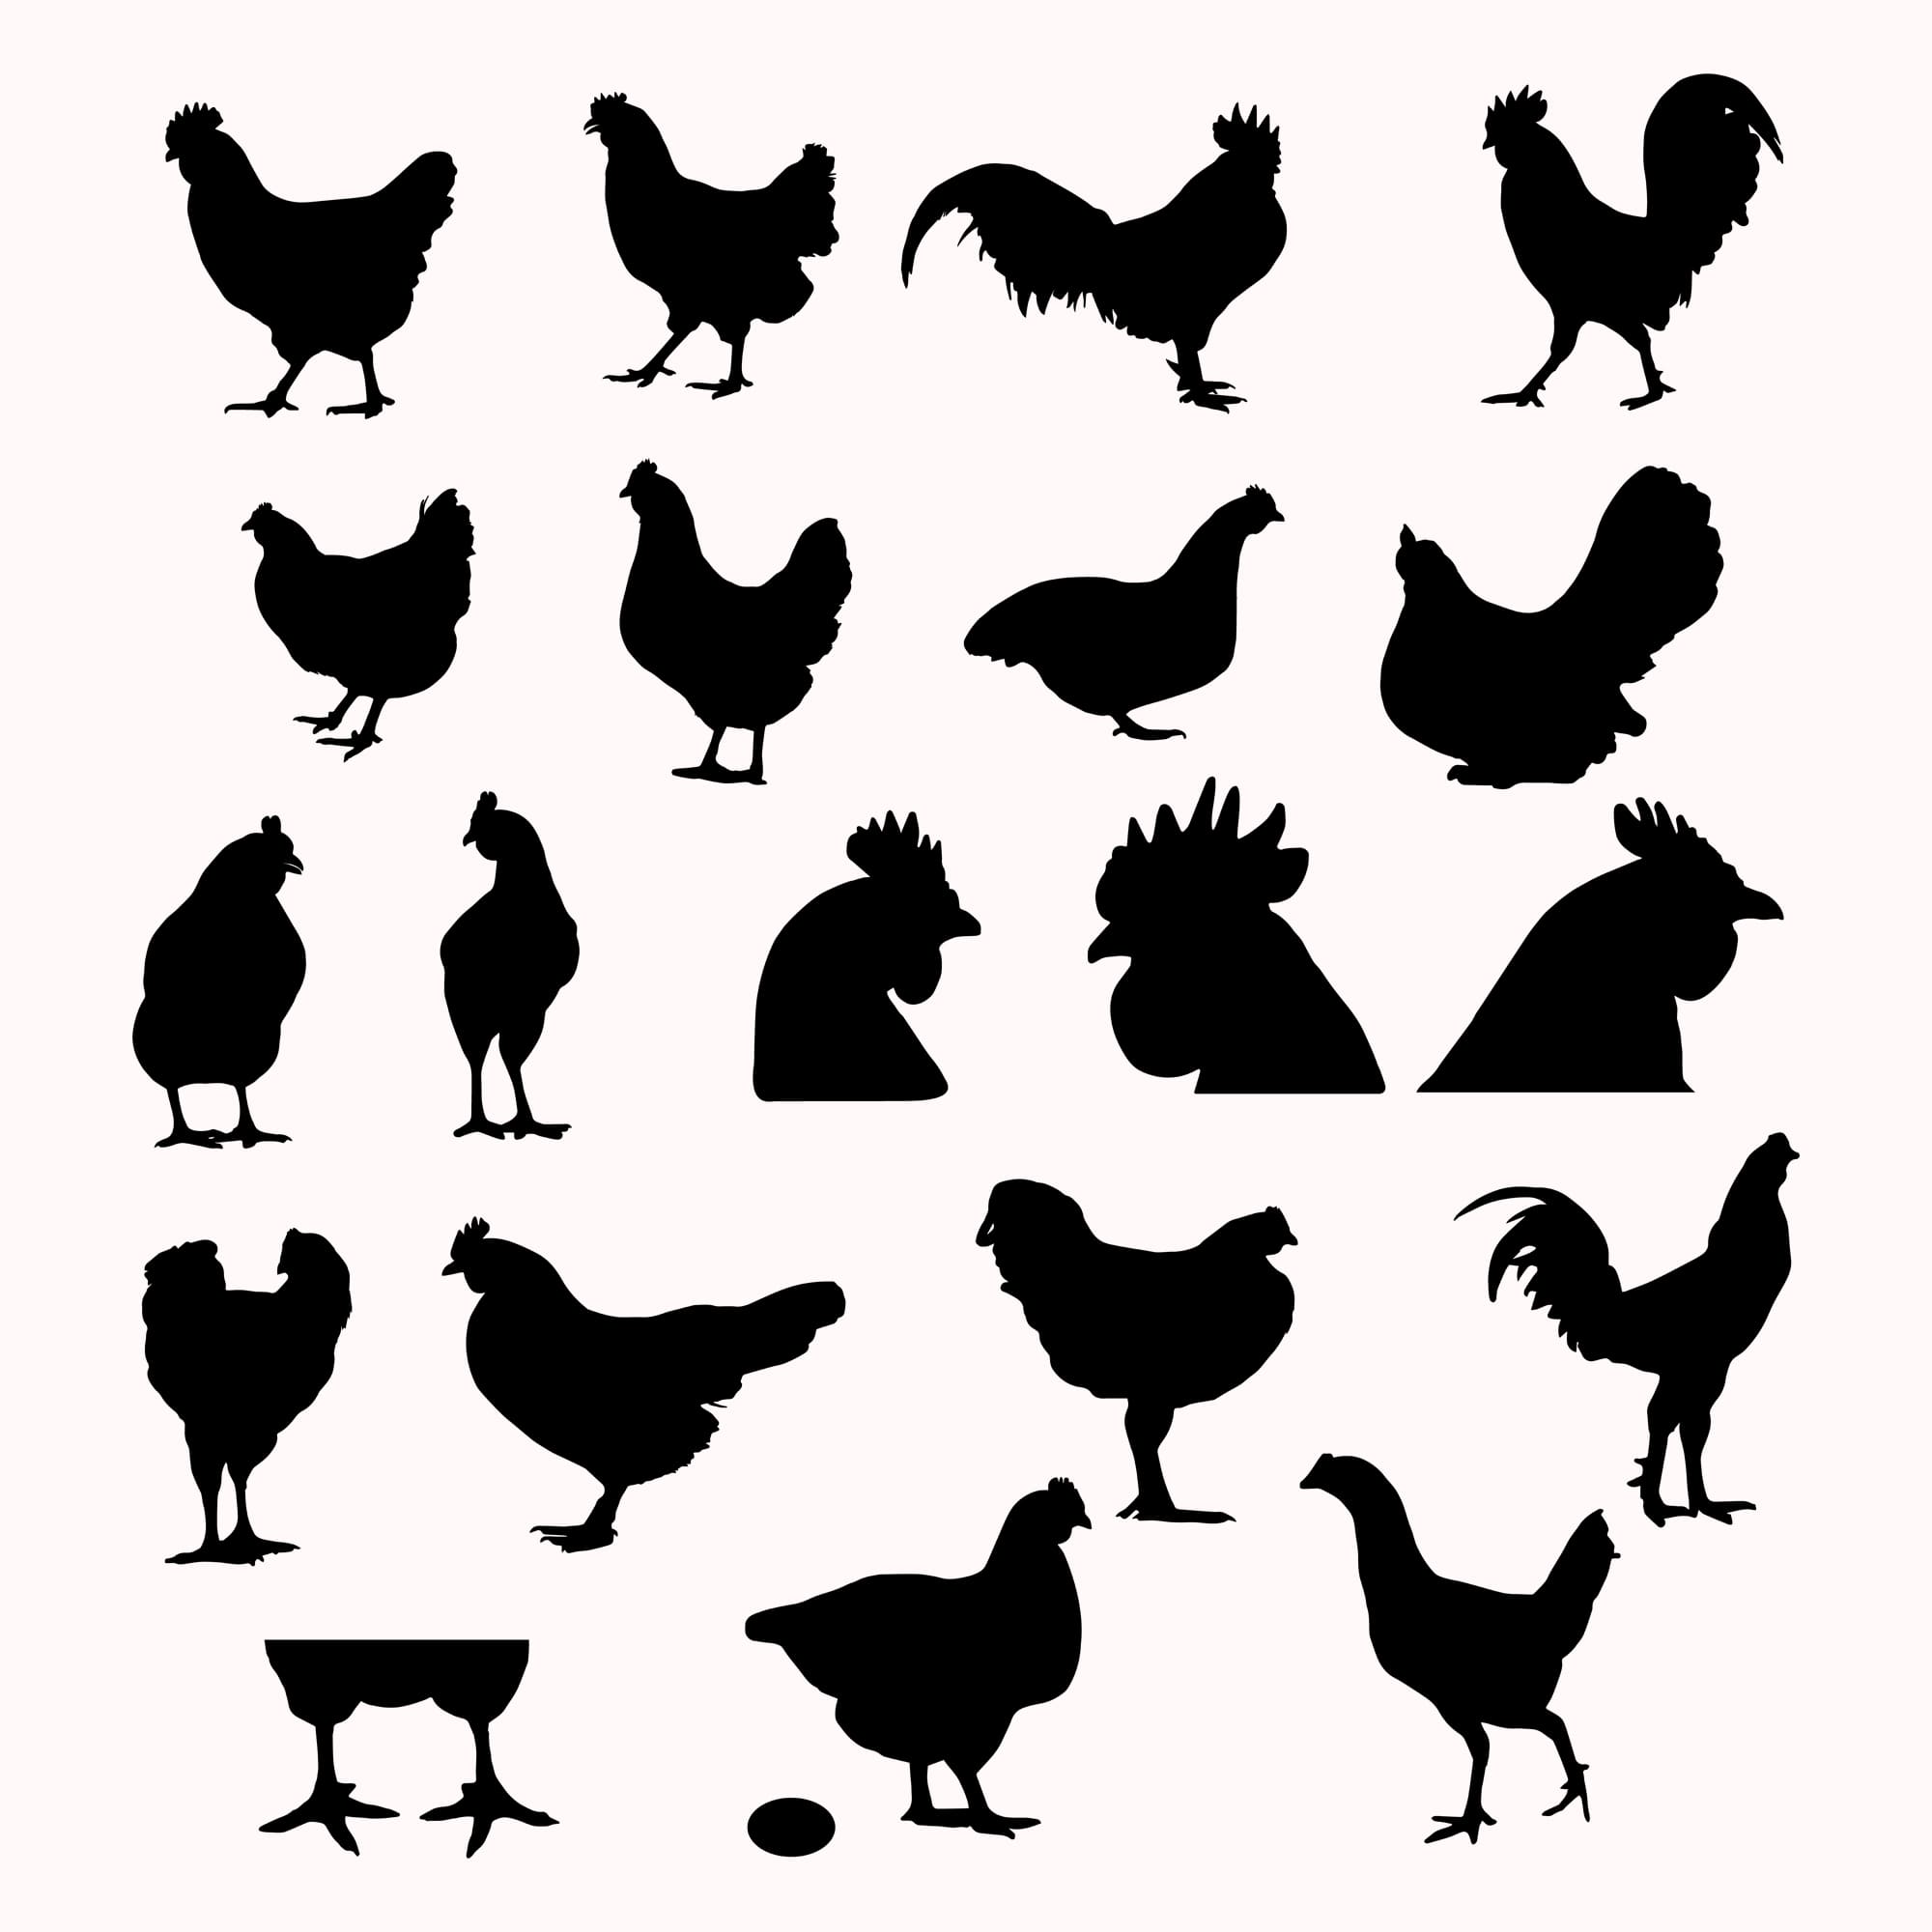 Bunch of chicken silhouettes on a white background.